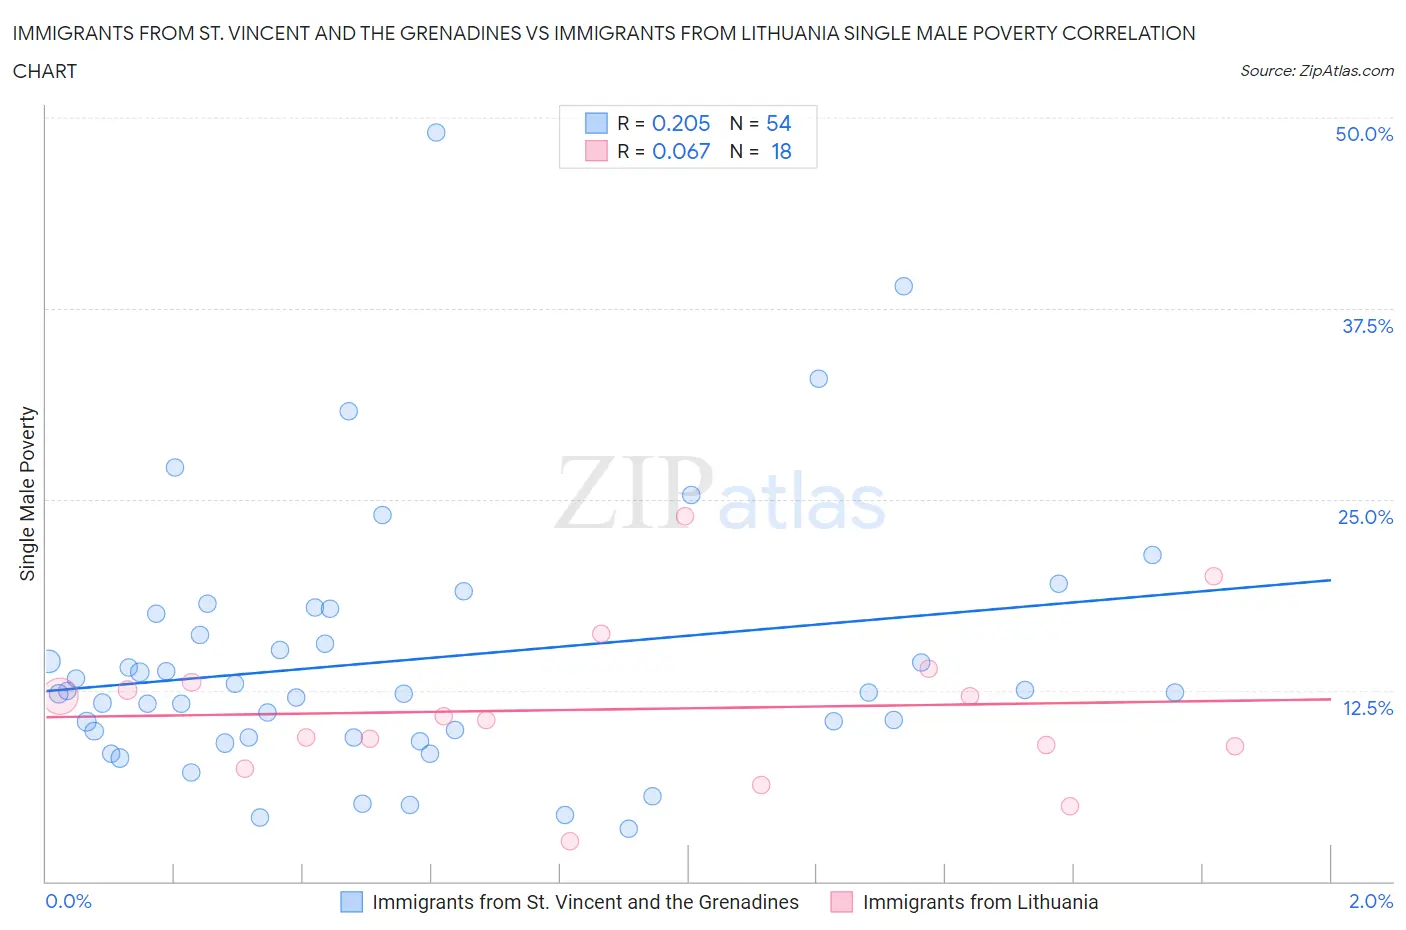 Immigrants from St. Vincent and the Grenadines vs Immigrants from Lithuania Single Male Poverty